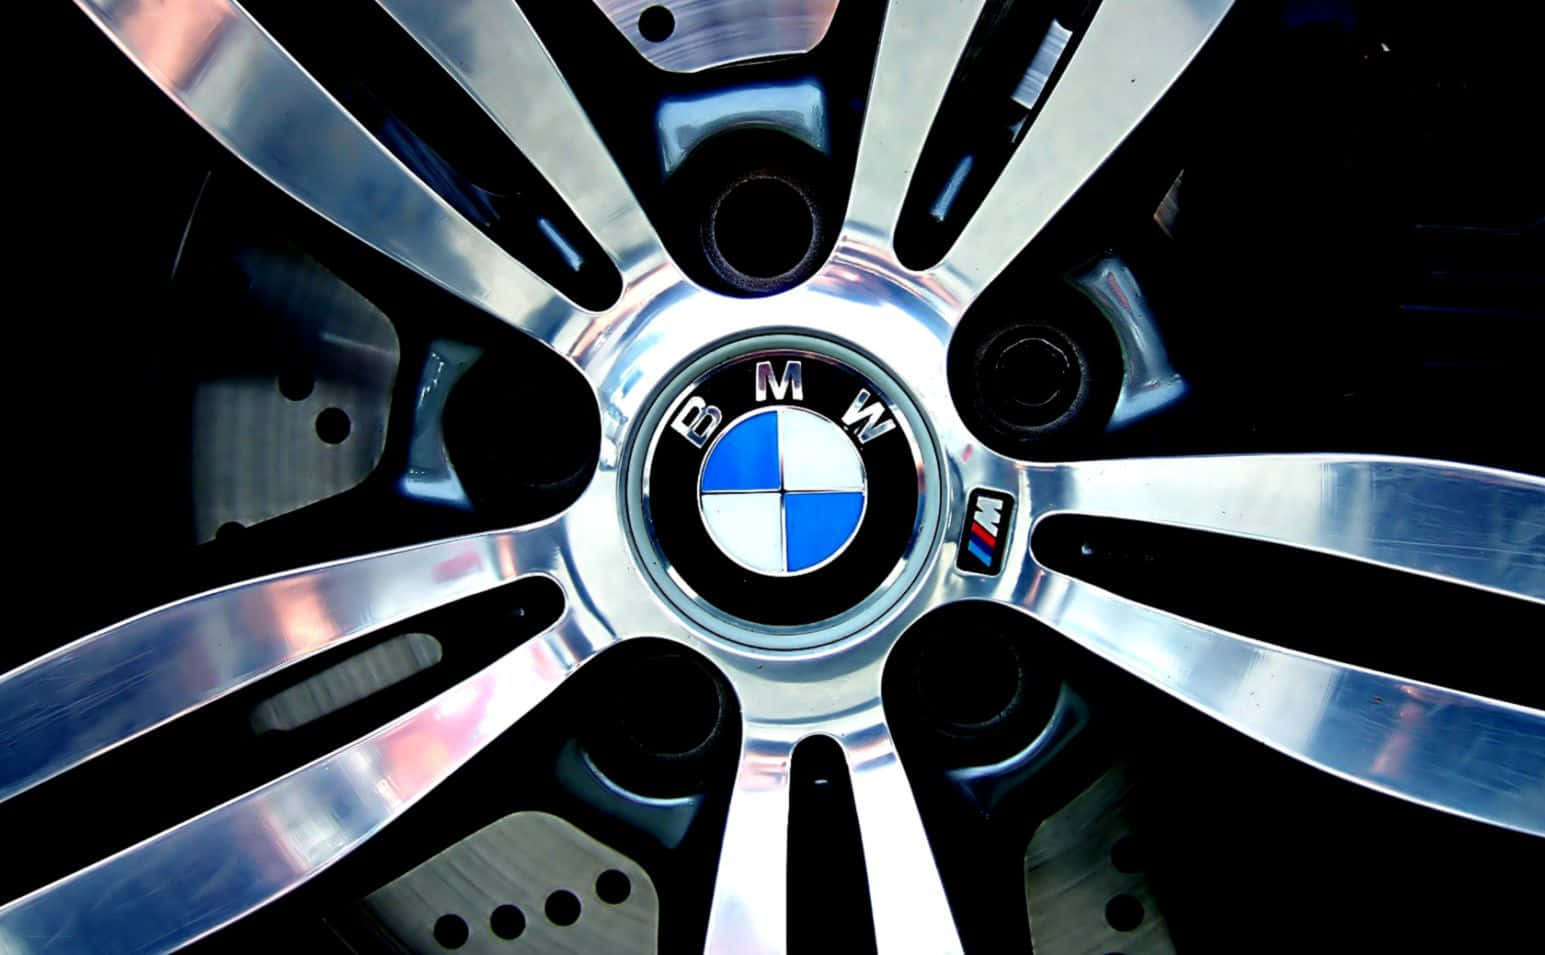 The Official Bmw Logo Against A Blue Background Background